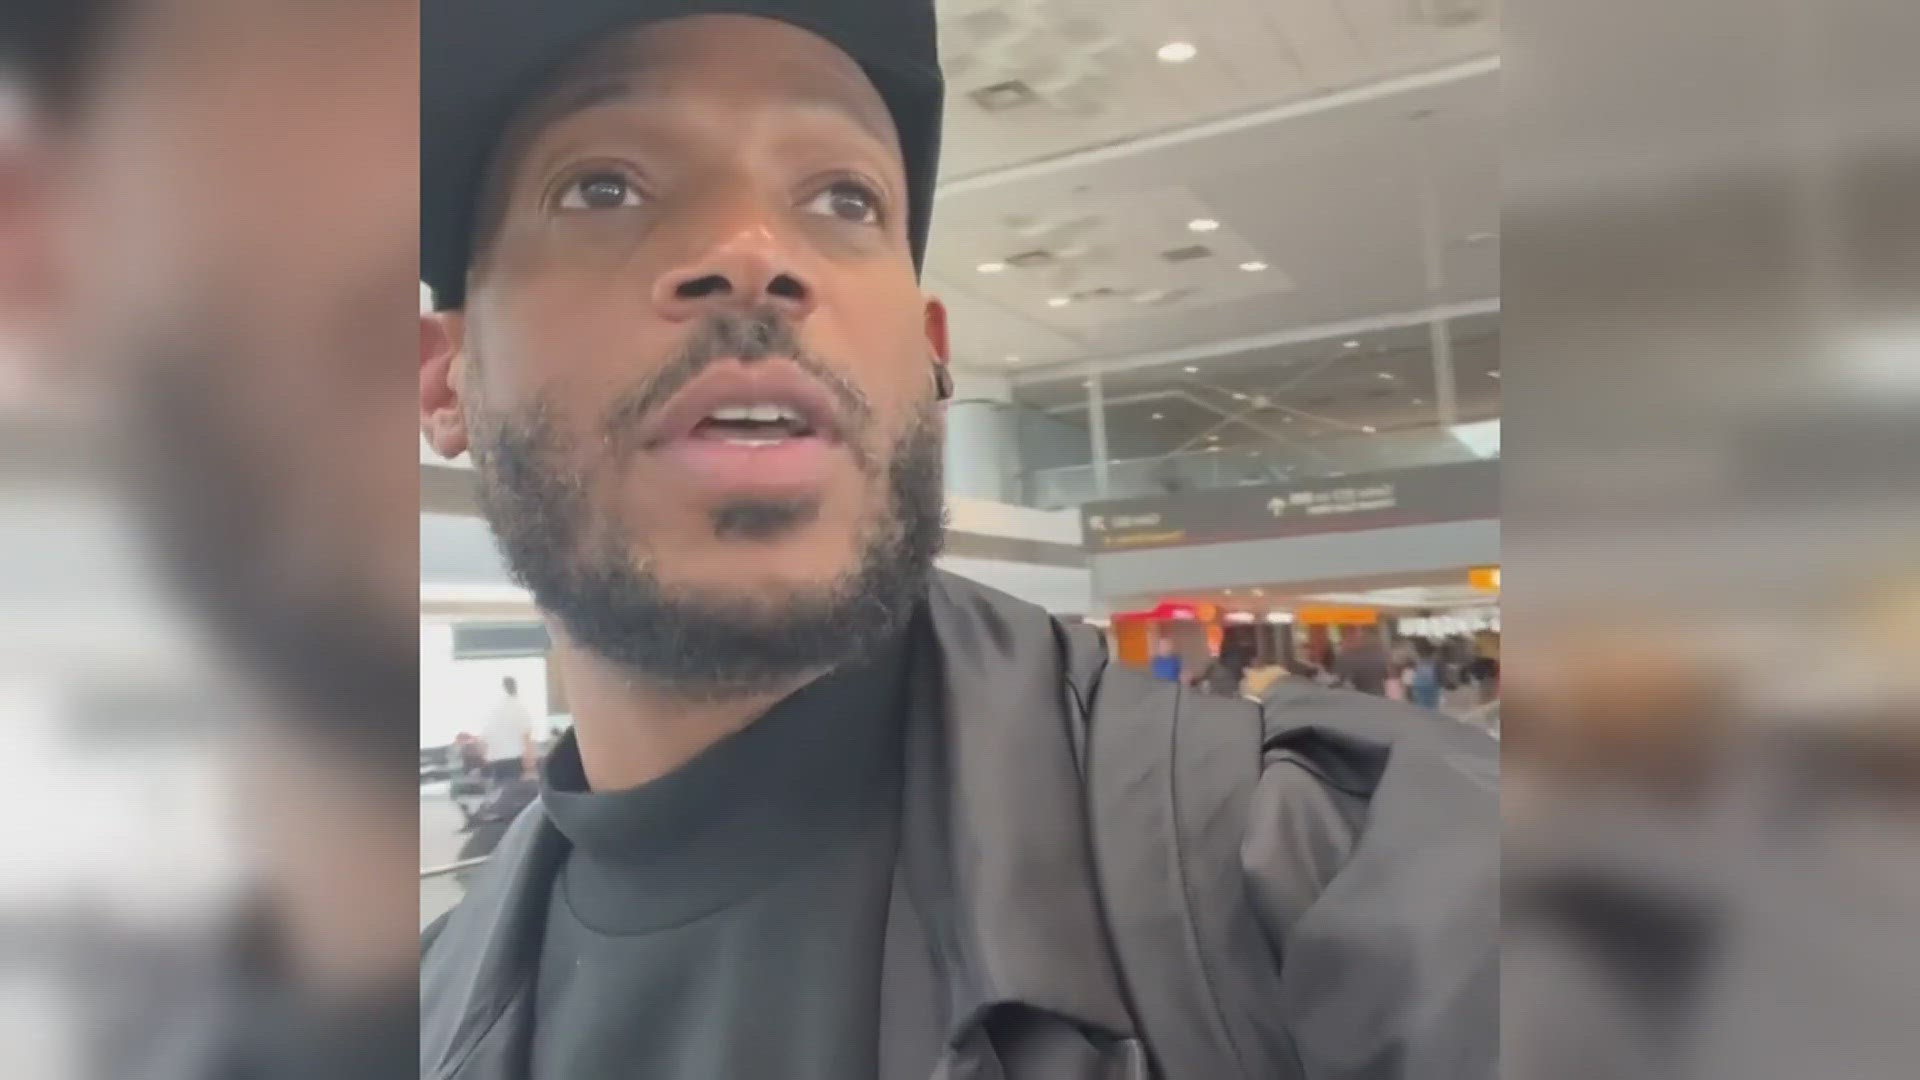 The incident at DIA happened in June. The Denver City Attorney's Office issued a citation to  Wayans for disturbing the peace.